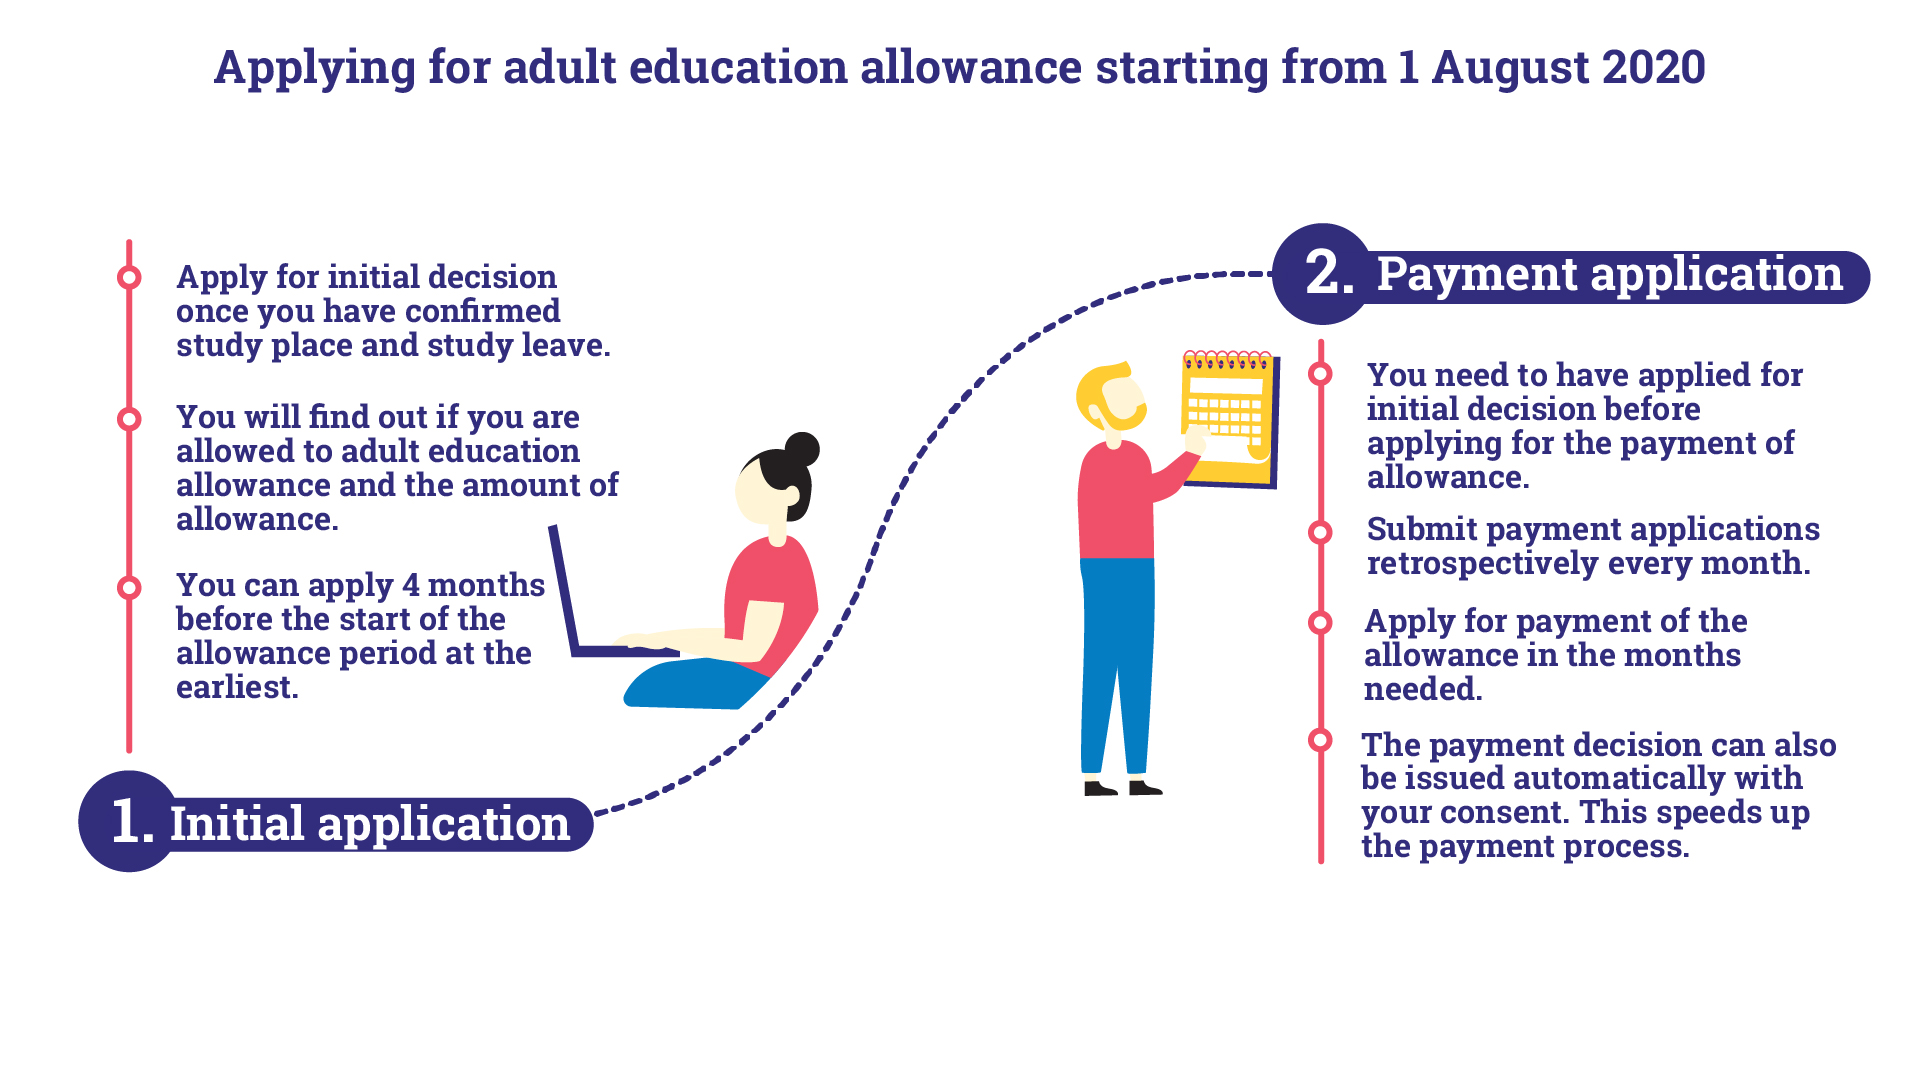 Applying for adult education allowance starting from 1 August 2020.